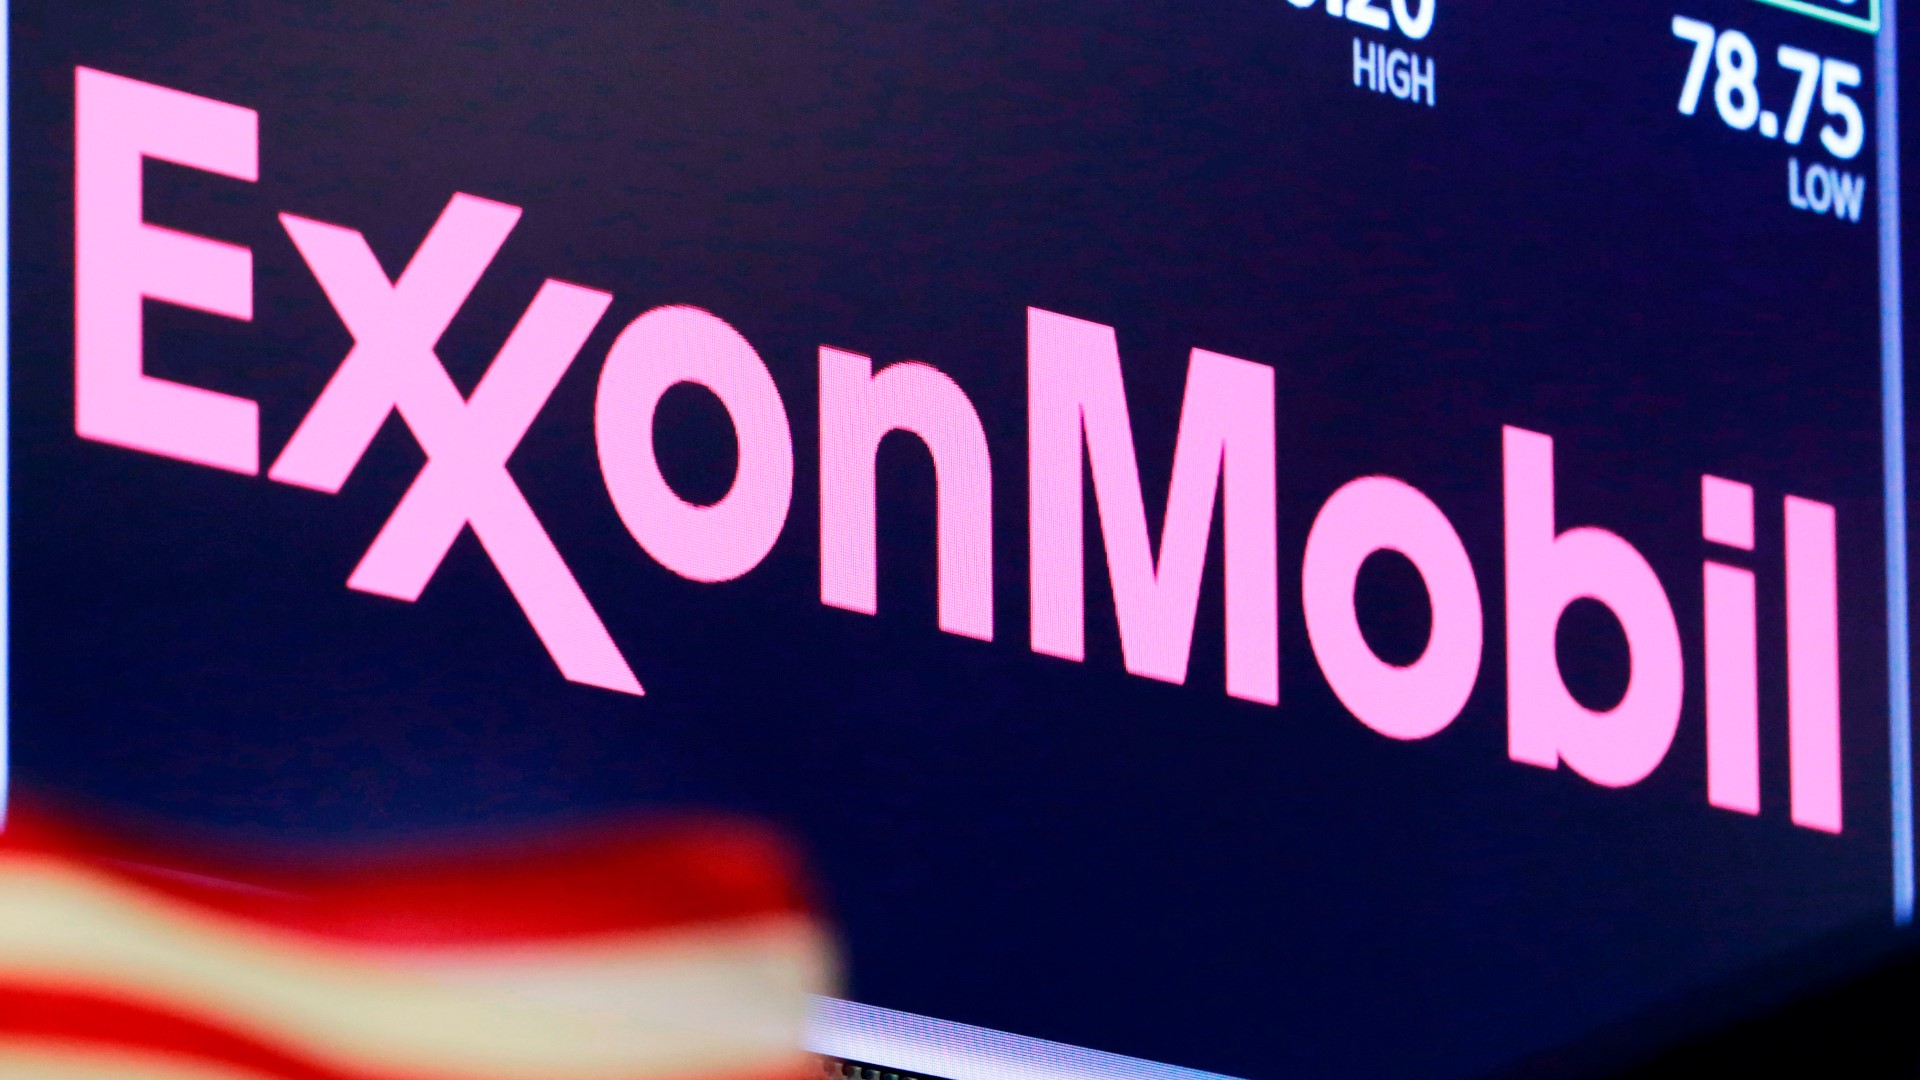 Currently, Exxon match employee's 401K savings up to 6%